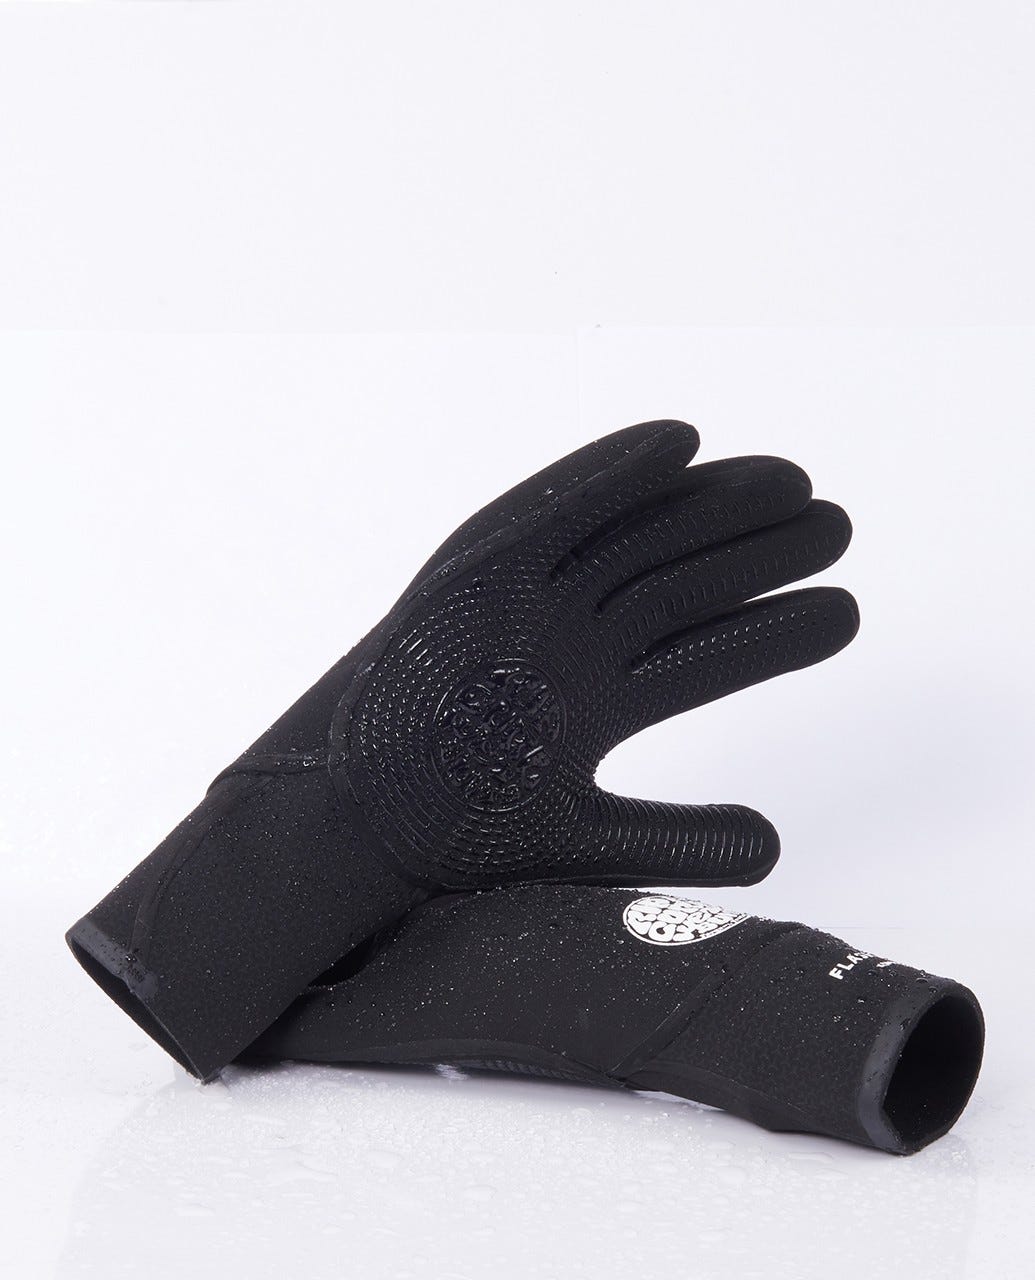 Rip Curl Flashbomb 3/2mm 5 Finger Wetsuit Glove